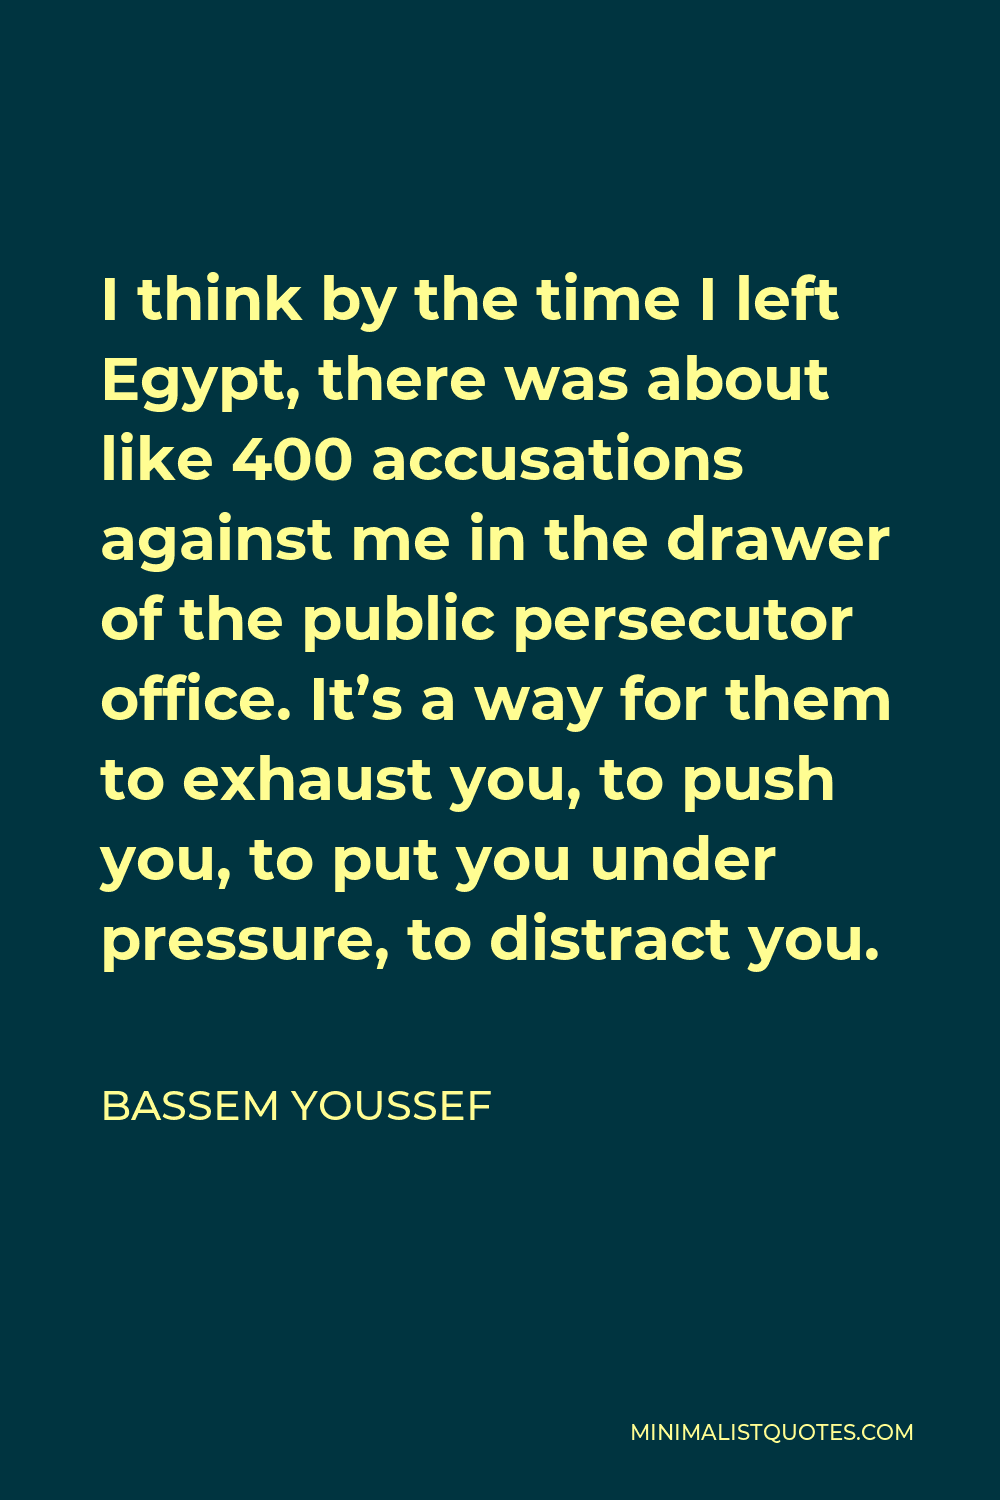 Bassem Youssef Quote - I think by the time I left Egypt, there was about like 400 accusations against me in the drawer of the public persecutor office. It’s a way for them to exhaust you, to push you, to put you under pressure, to distract you.